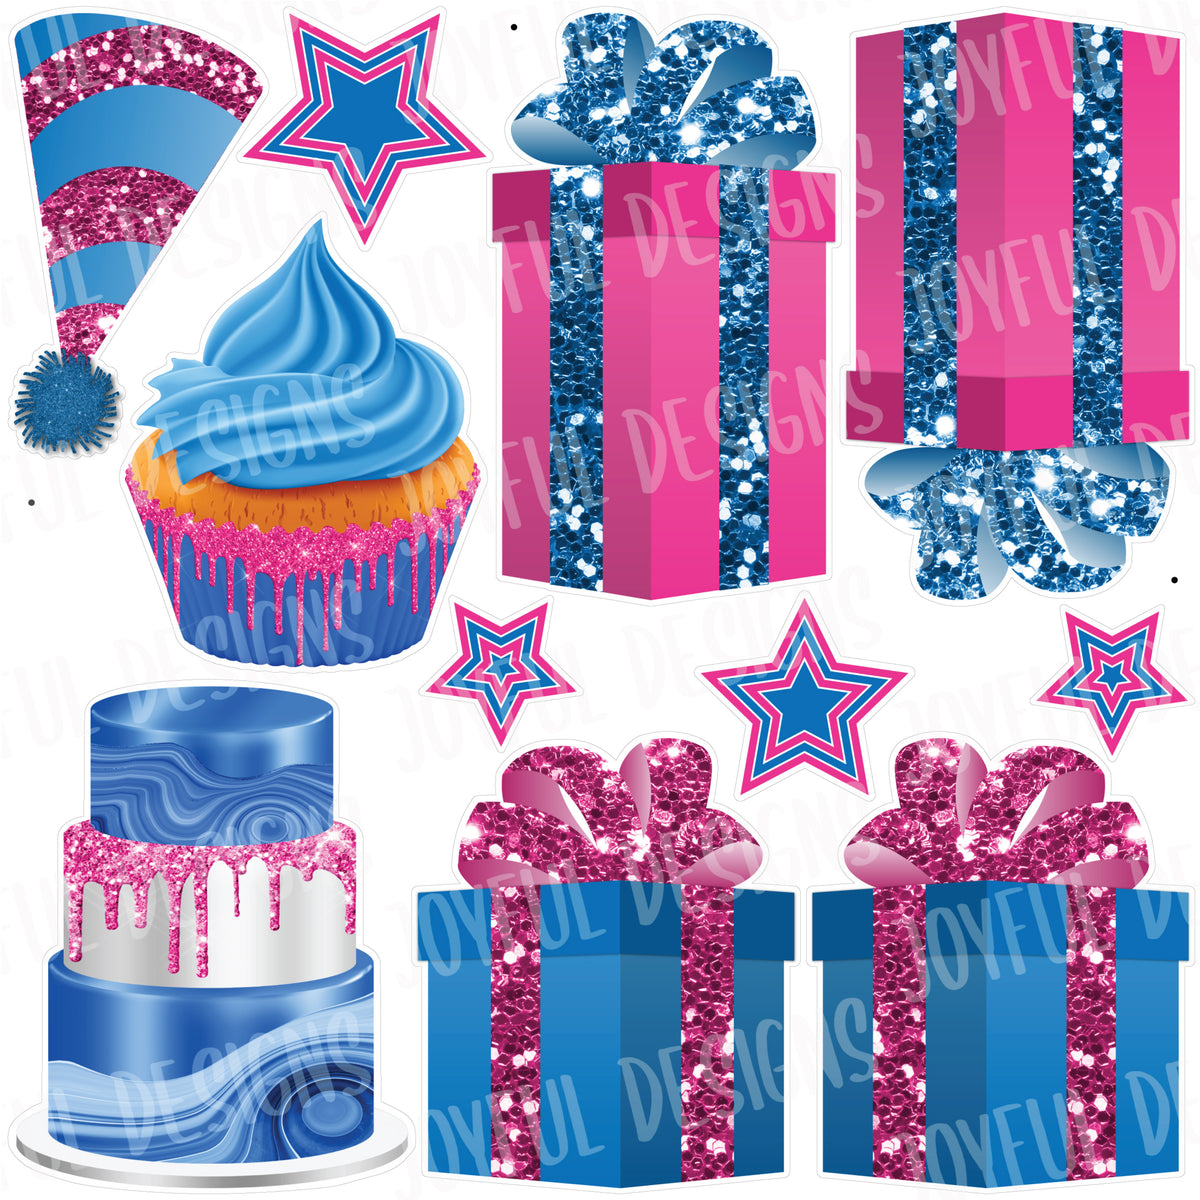 Razzle Dazzle Birthday Flair Half from "One and Done" Set